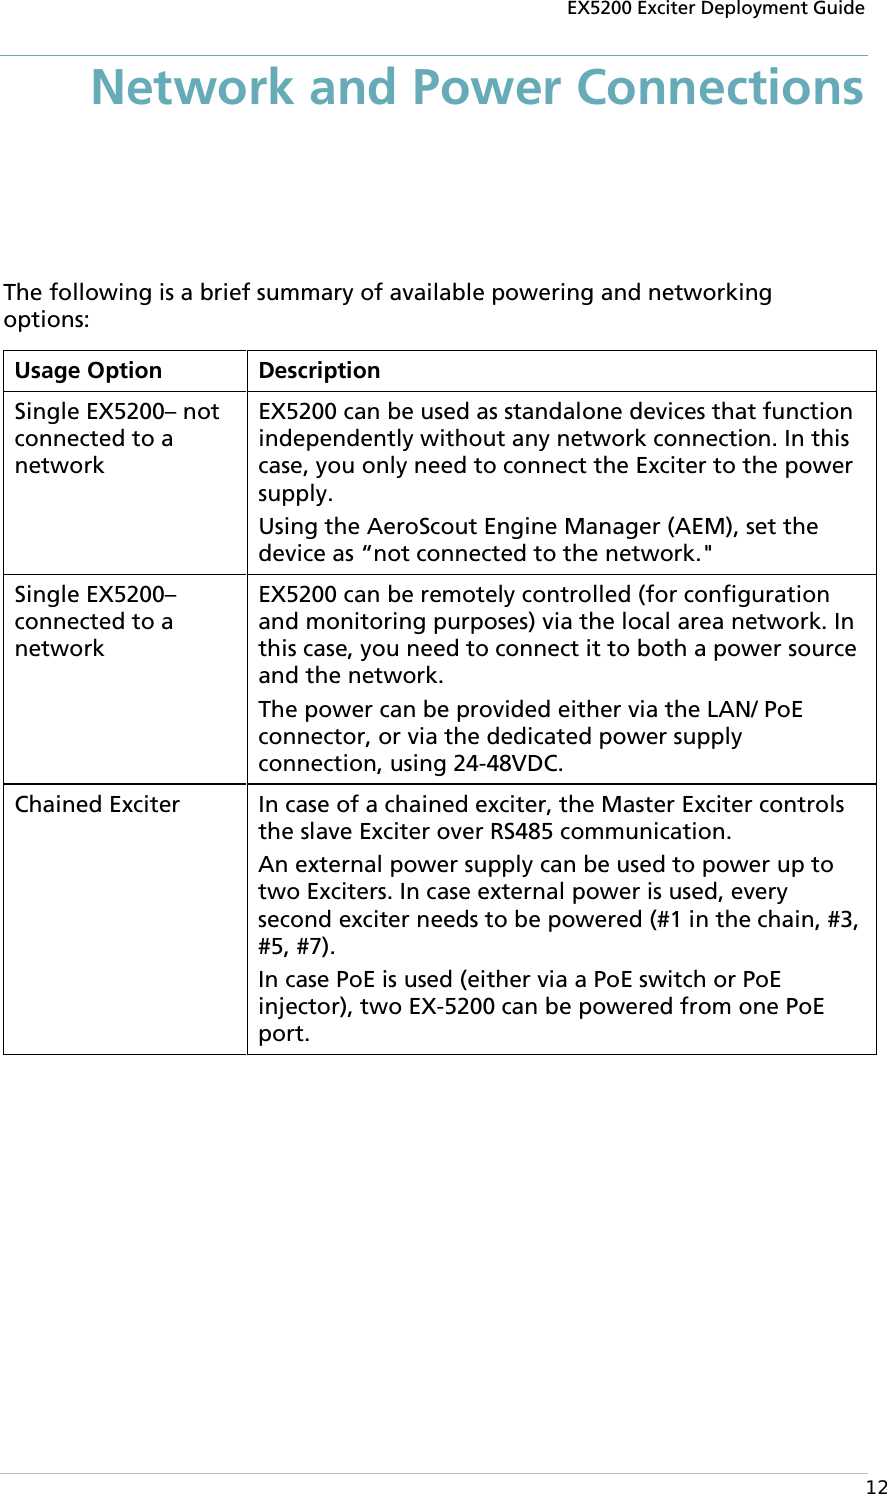 EX5200 Exciter Deployment Guide  12 Network and Power Connections The following is a brief summary of available powering and networking options: Usage Option Description Single EX5200– not connected to a network EX5200 can be used as standalone devices that function independently without any network connection. In this case, you only need to connect the Exciter to the power supply.  Using the AeroScout Engine Manager (AEM), set the device as “not connected to the network.&quot;  Single EX5200– connected to a network EX5200 can be remotely controlled (for configuration and monitoring purposes) via the local area network. In this case, you need to connect it to both a power source and the network.  The power can be provided either via the LAN/ PoE connector, or via the dedicated power supply connection, using 24-48VDC. Chained Exciter In case of a chained exciter, the Master Exciter controls the slave Exciter over RS485 communication. An external power supply can be used to power up to two Exciters. In case external power is used, every second exciter needs to be powered (#1 in the chain, #3, #5, #7). In case PoE is used (either via a PoE switch or PoE injector), two EX-5200 can be powered from one PoE port.  